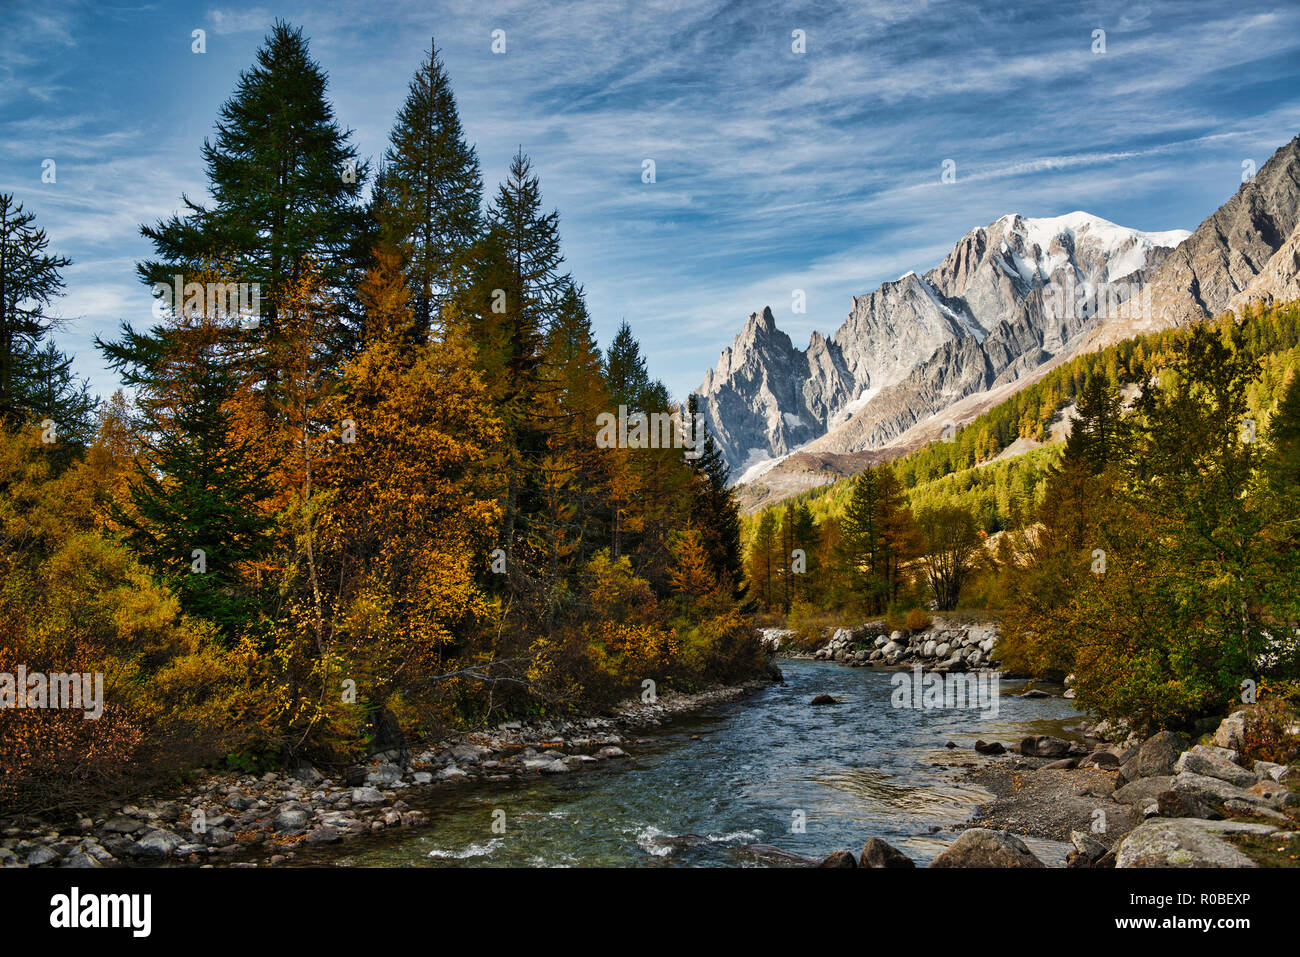 The river in Ferret Valley during the autumn season with the Mont Blanc wall in the background and clouds in the sky Stock Photo